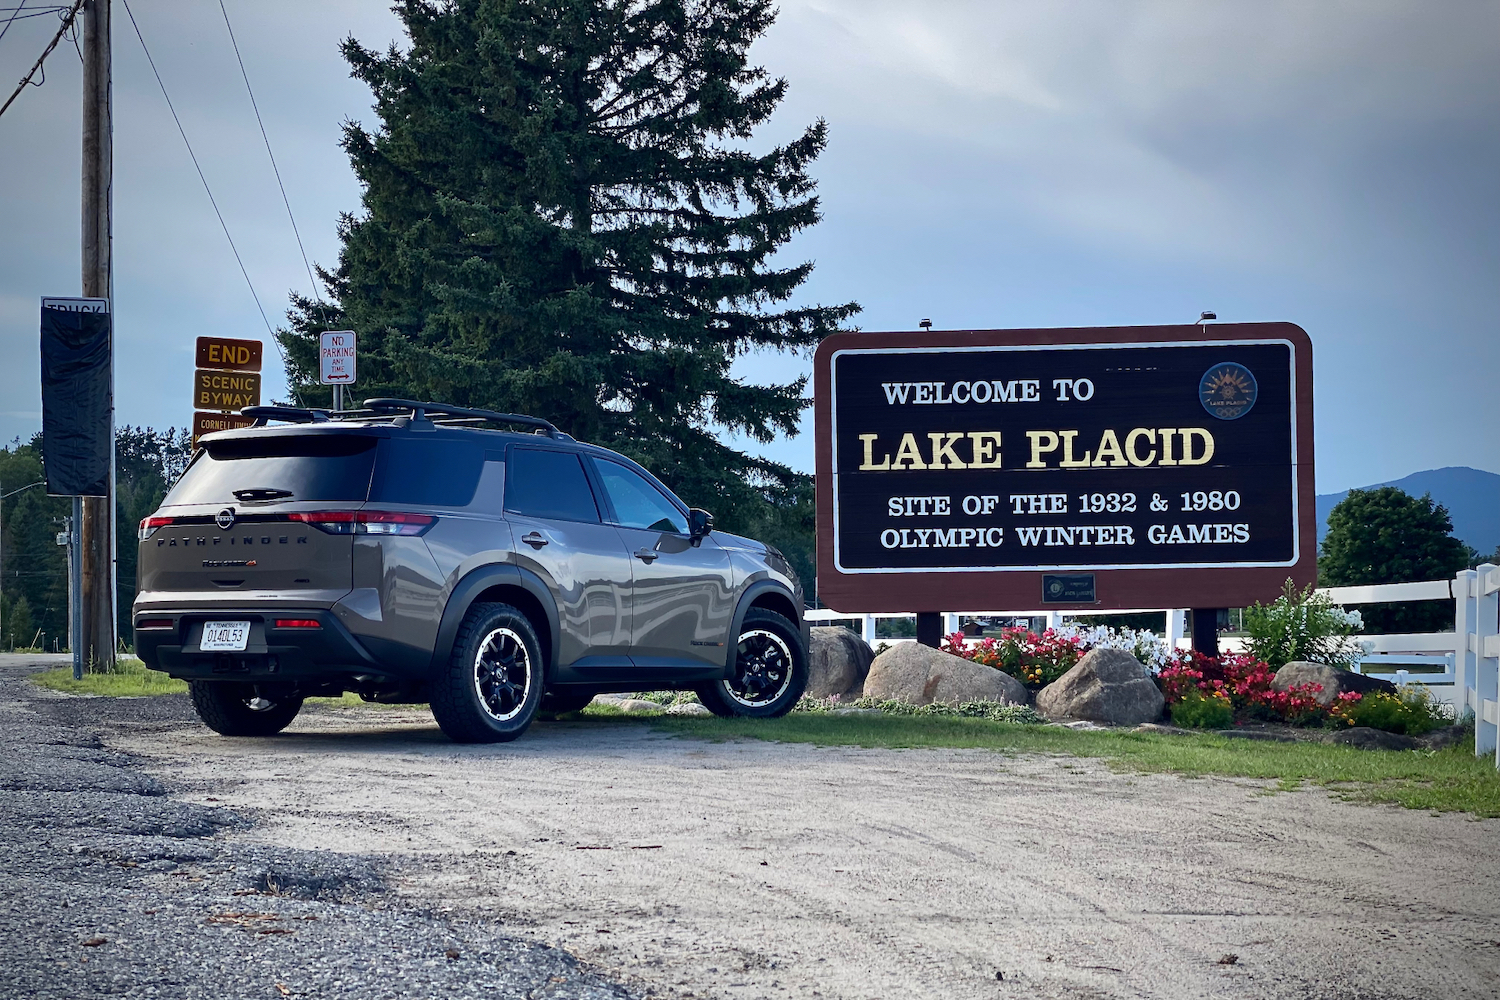 2023 Nissan Pathfinder Rock Creek rear end angle from passenger's side in front of Lake Placid sign.